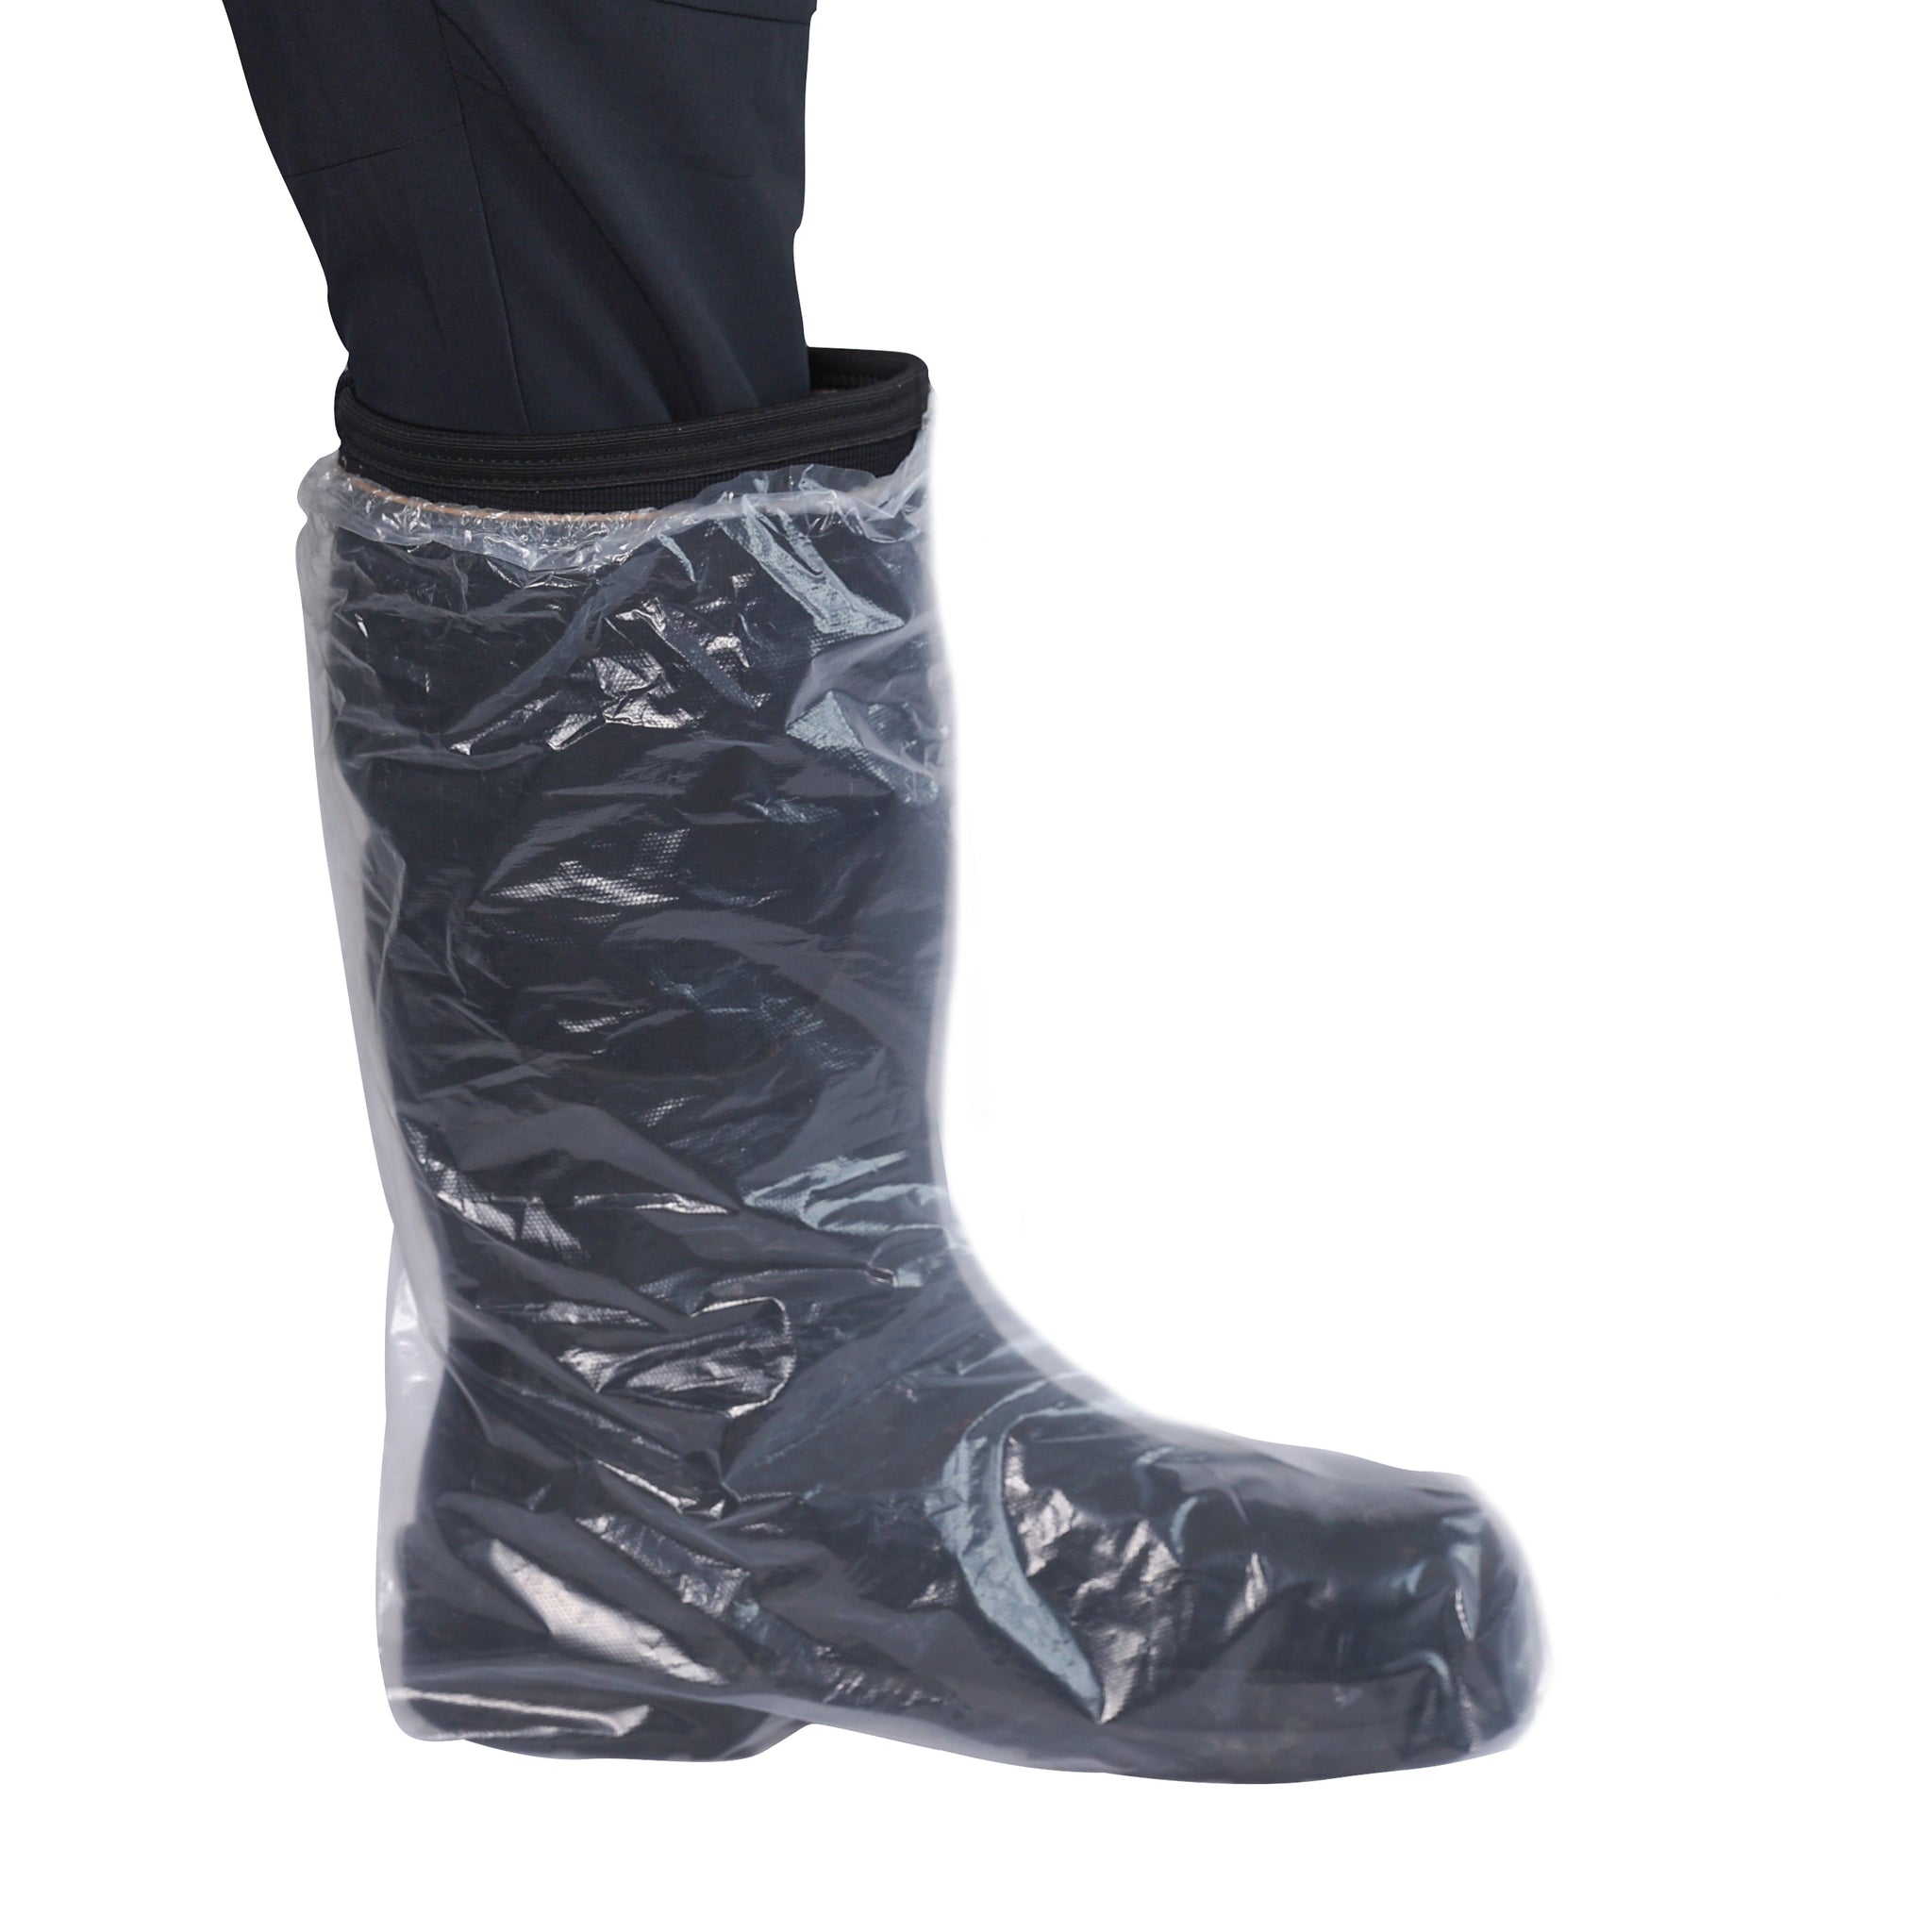 B75H7 Clear Polyethylene Boot Covers with Elastic Top